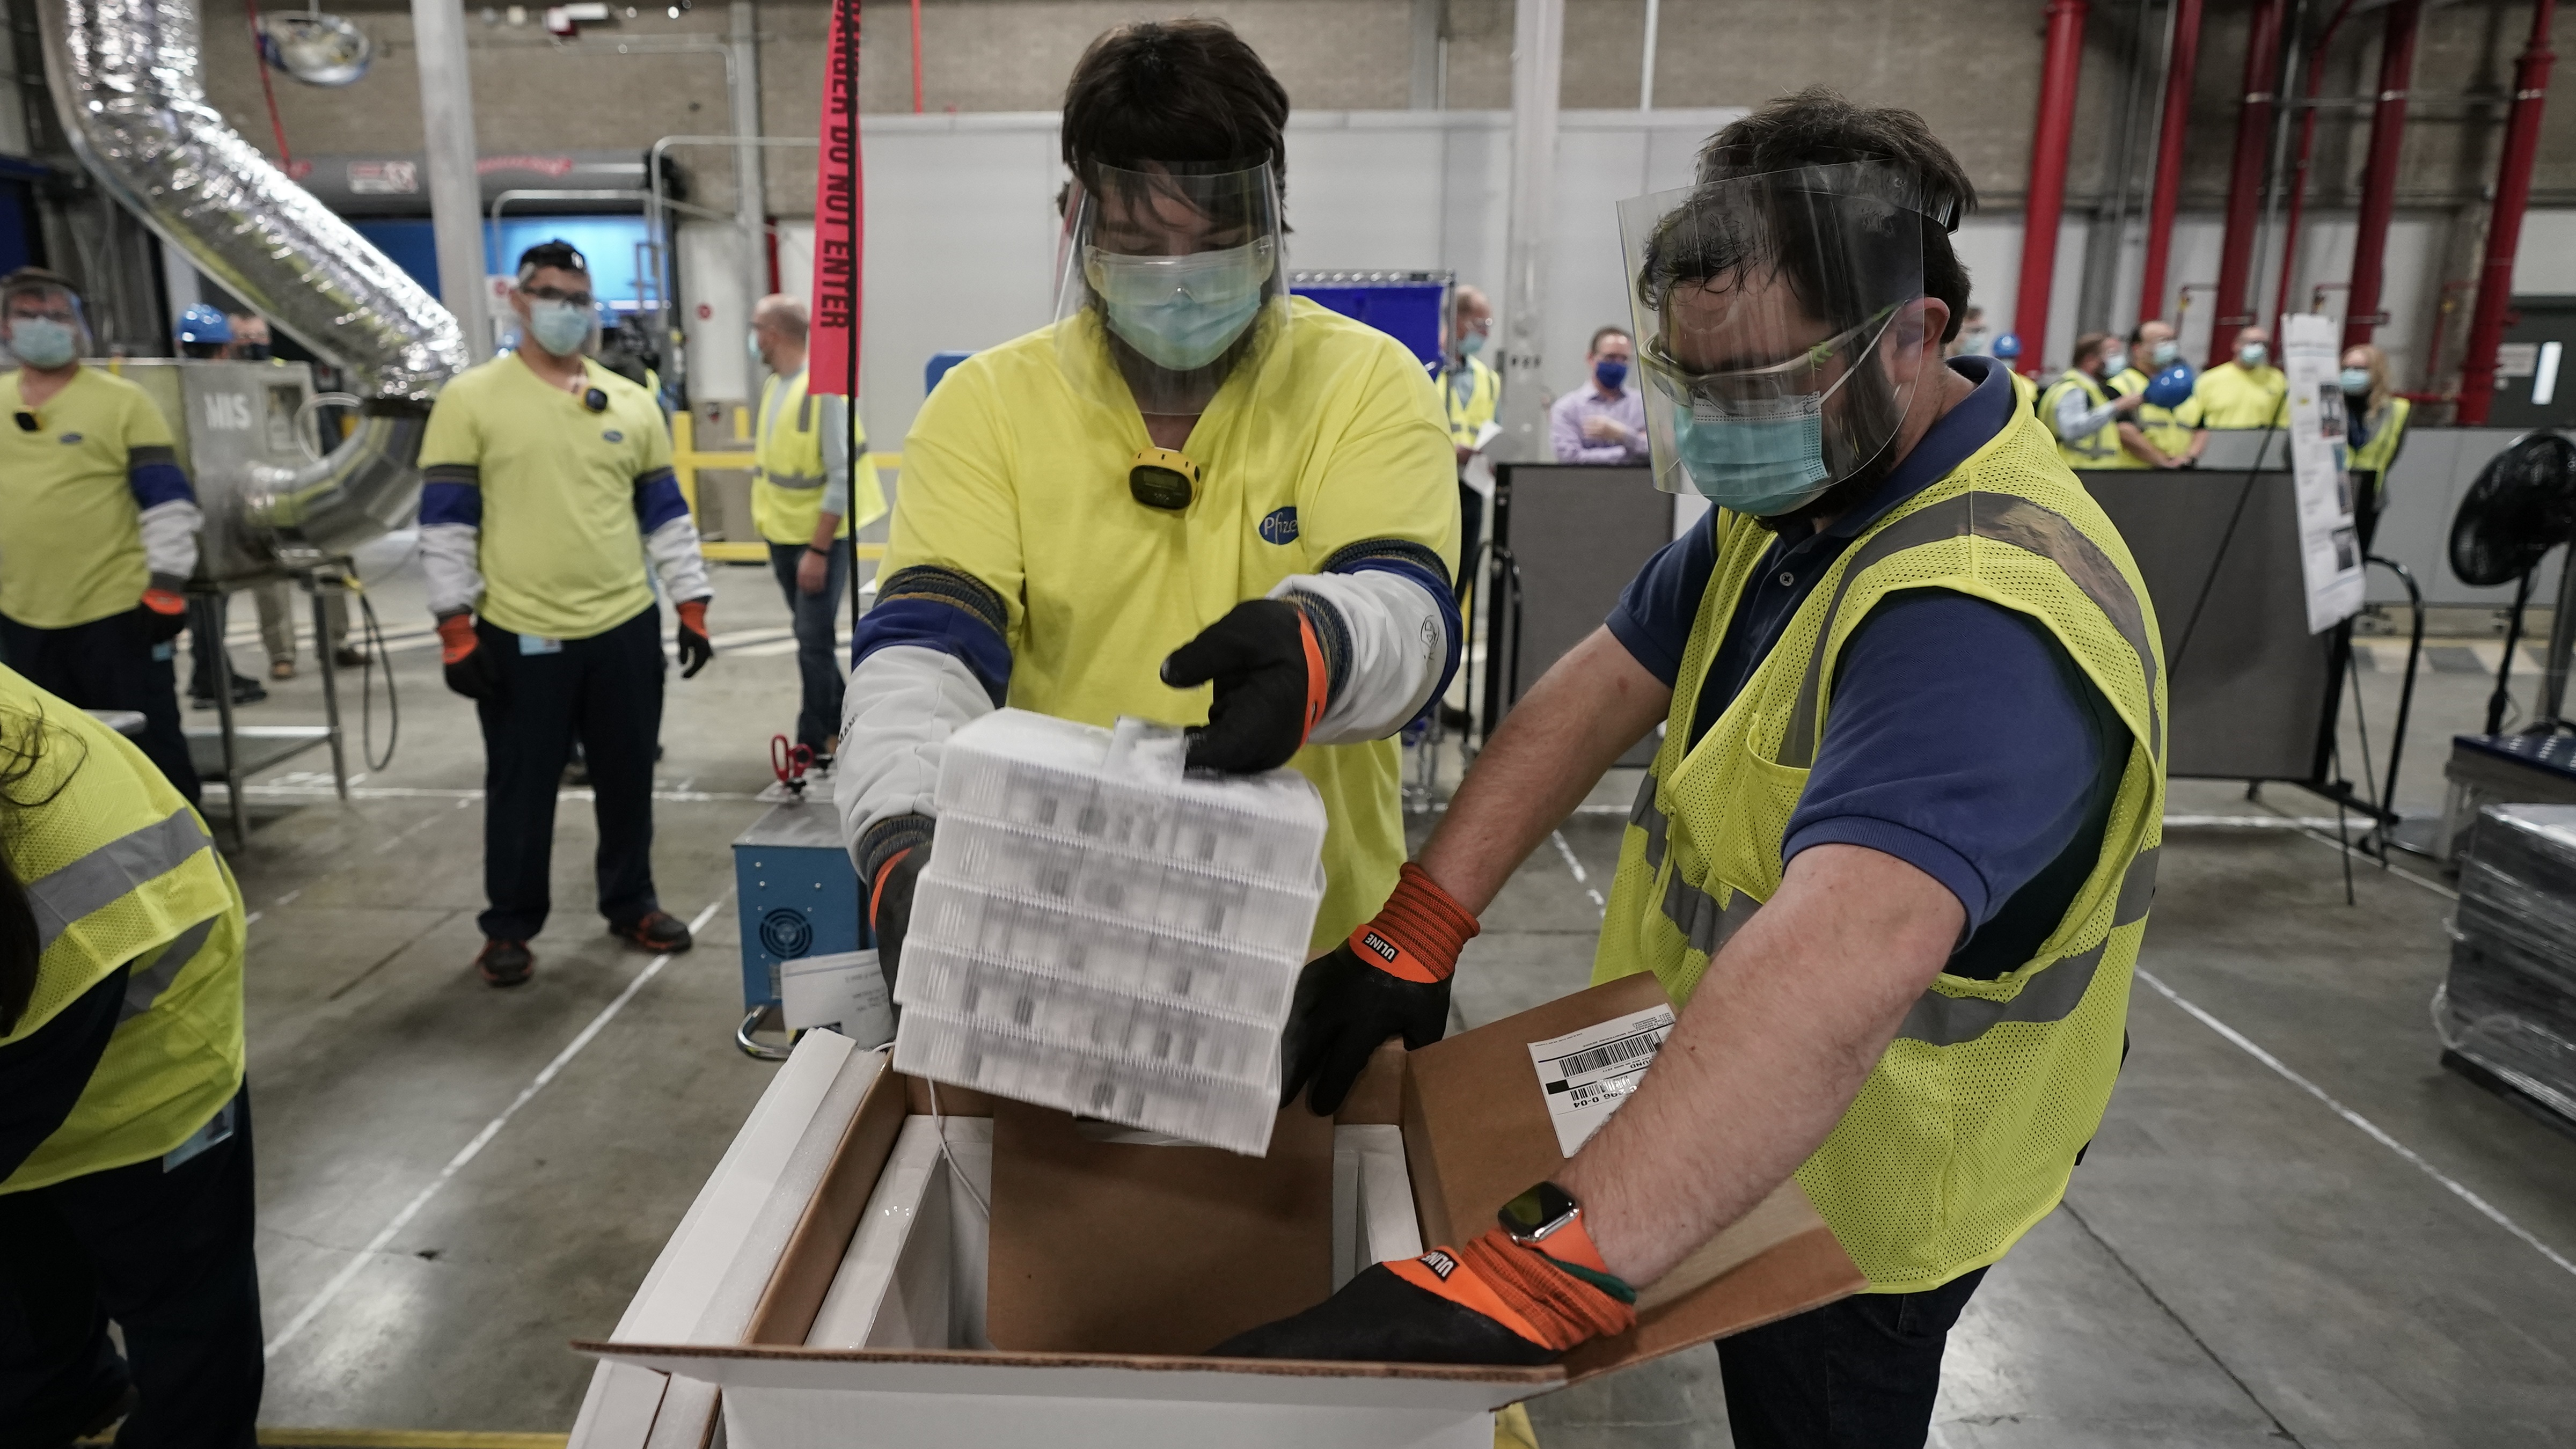 Boxes containing the Pfizer vaccine are prepared for shipping